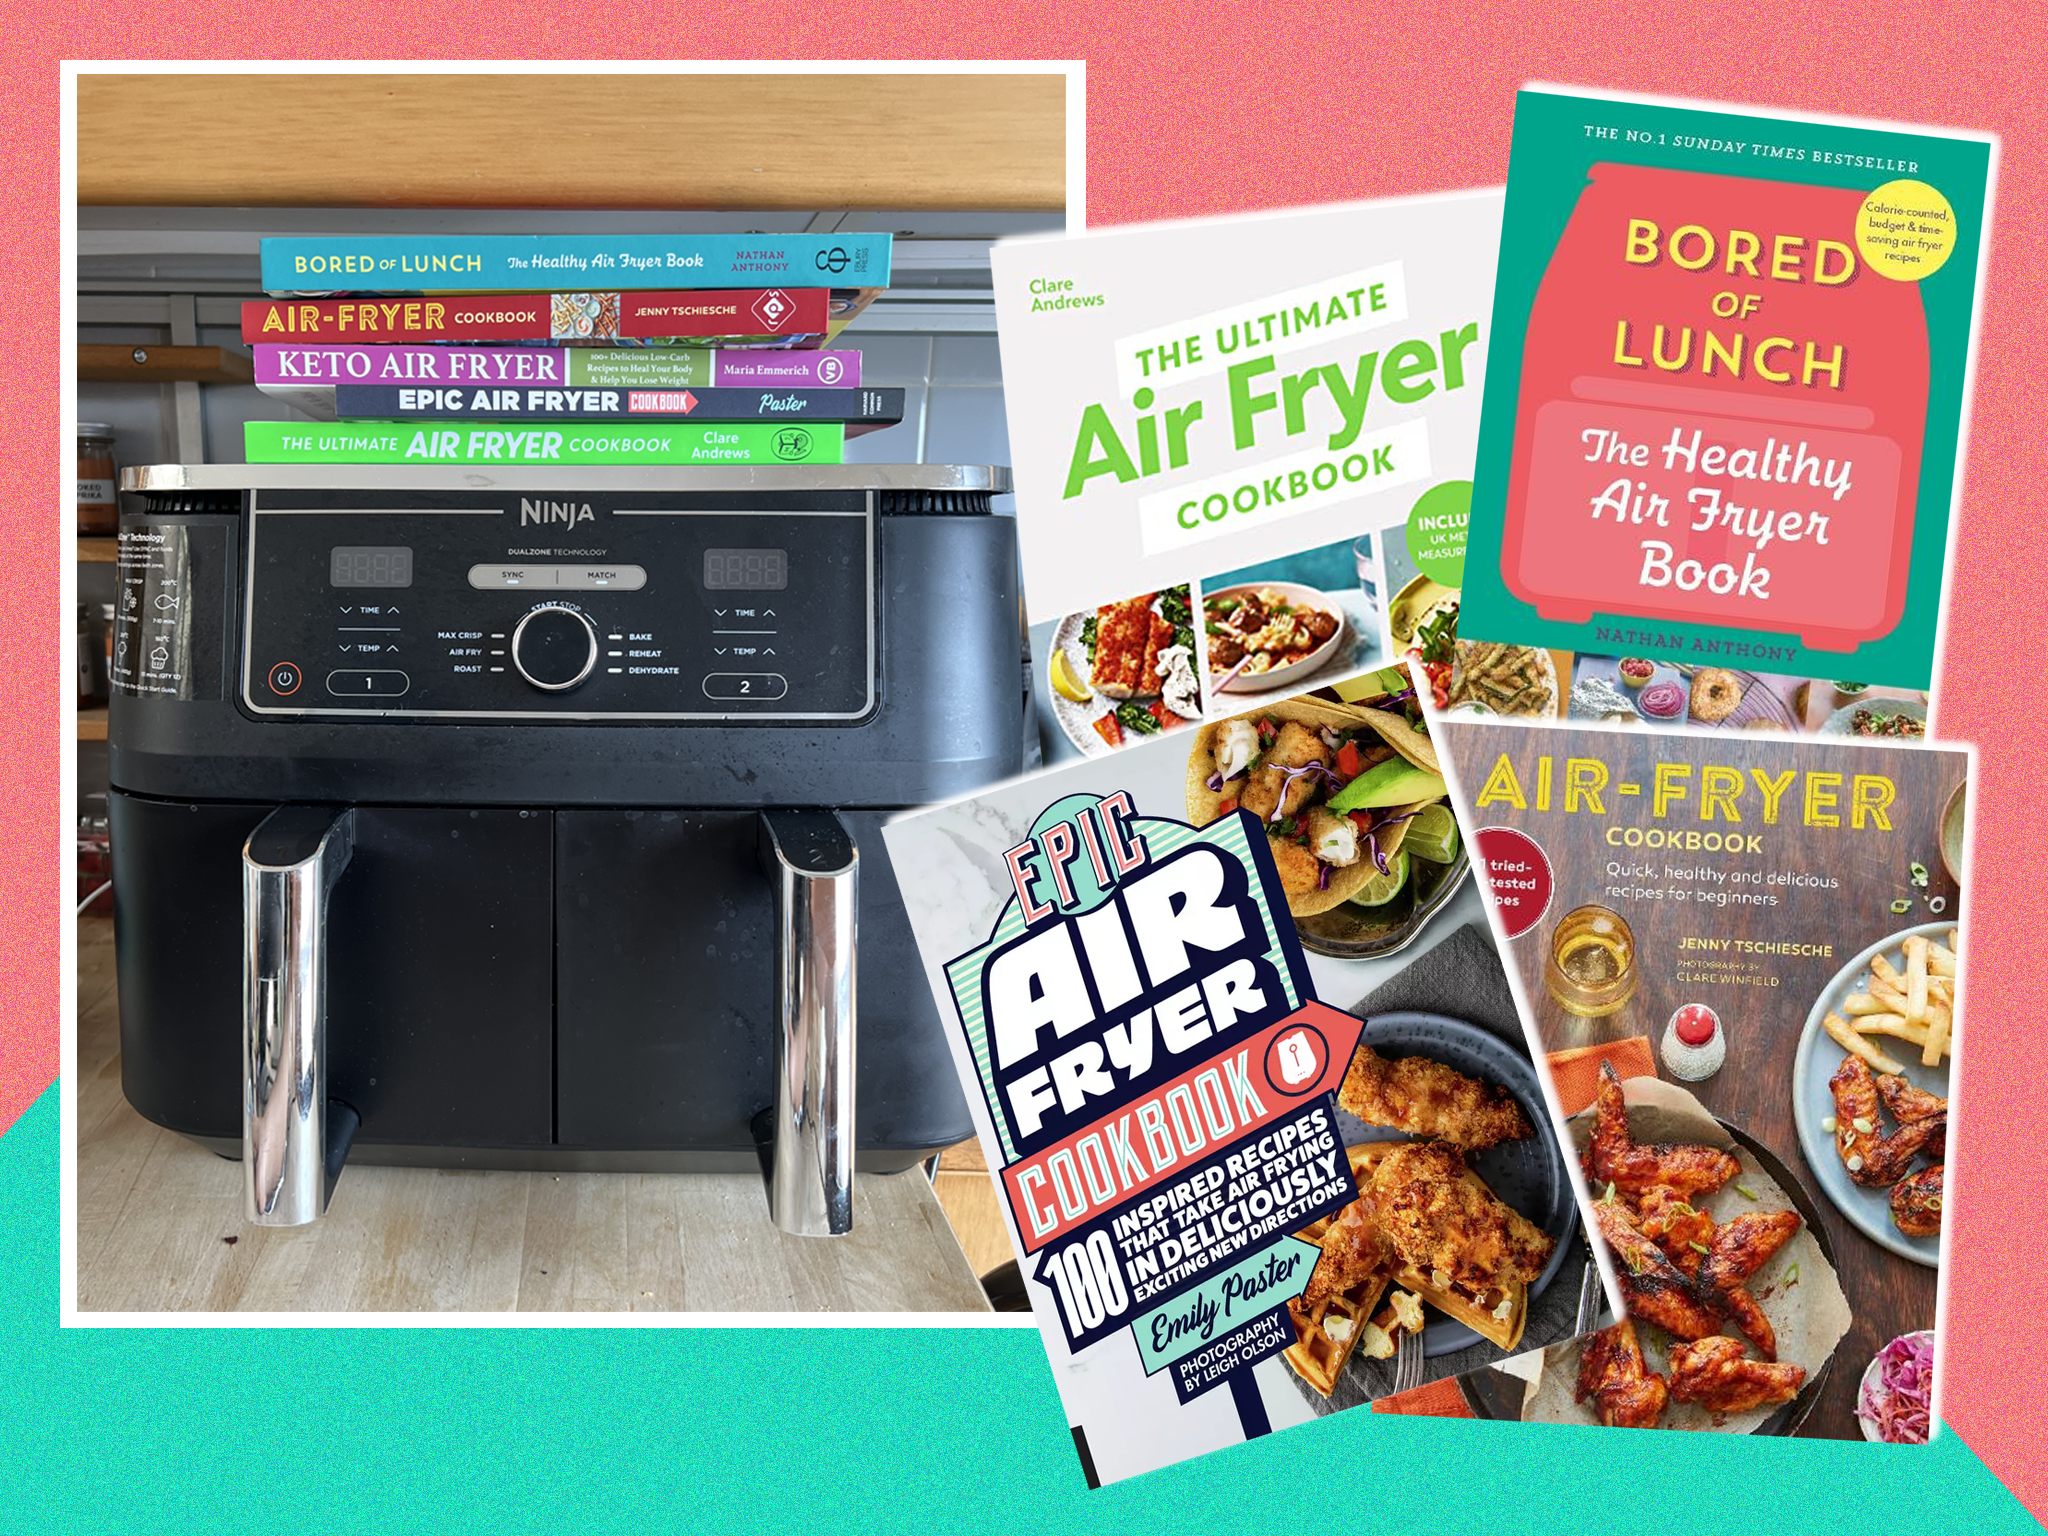 https://static.independent.co.uk/2023/06/27/15/best%20air%20fryer%20cook%20books.png